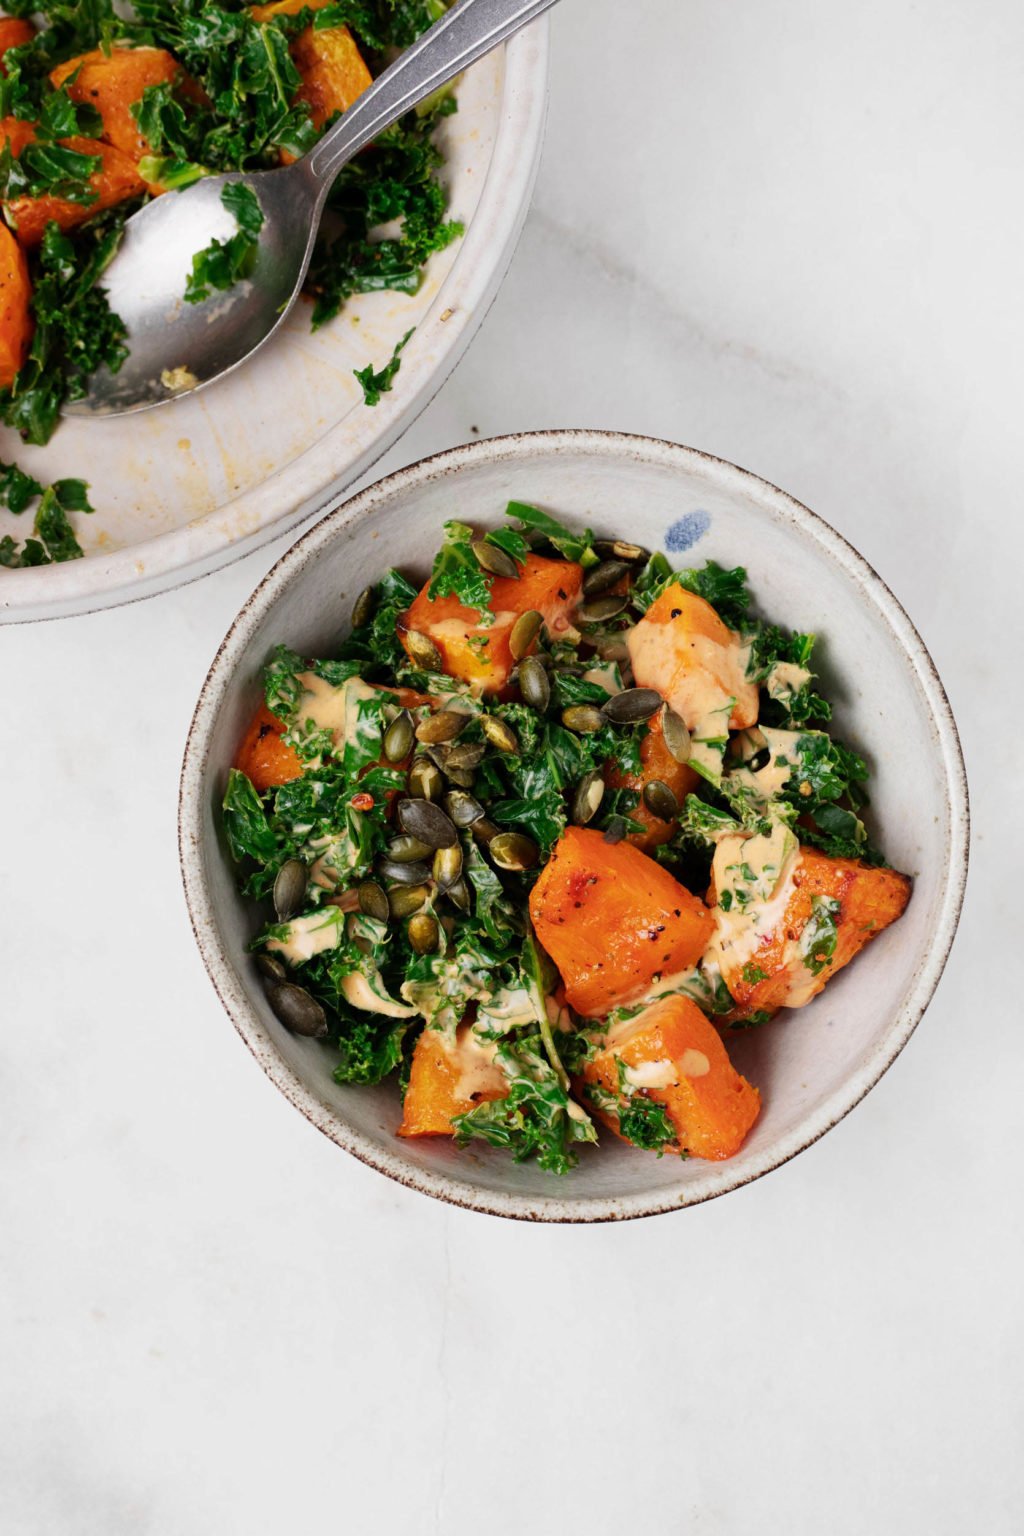 Two bowls of warm winter squash and steamed kale rest on a white marble surface.